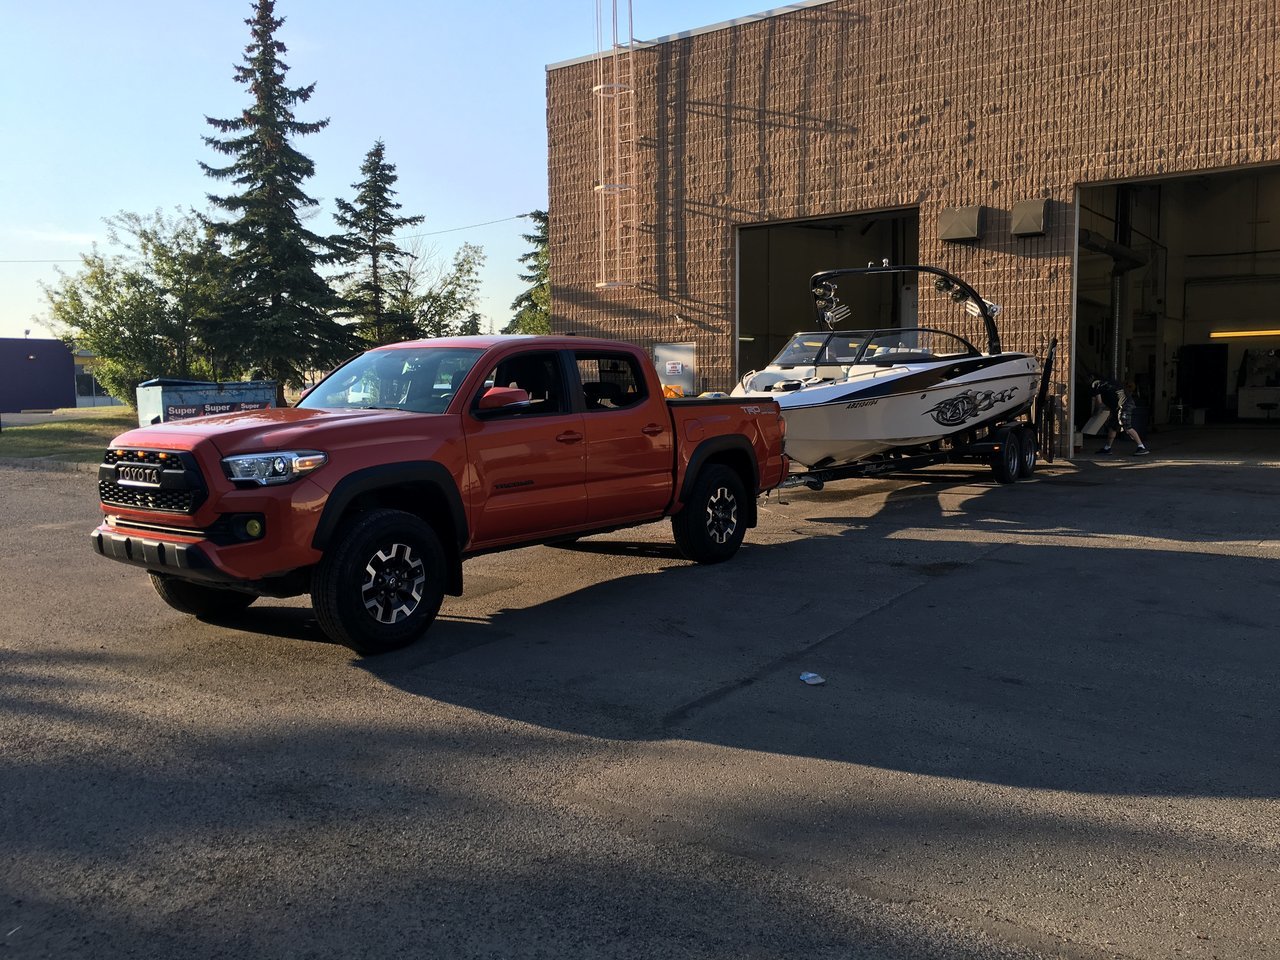 Toyota Tacoma Towing Capacity How Much Can A Tacoma Pull Empyre Off Road